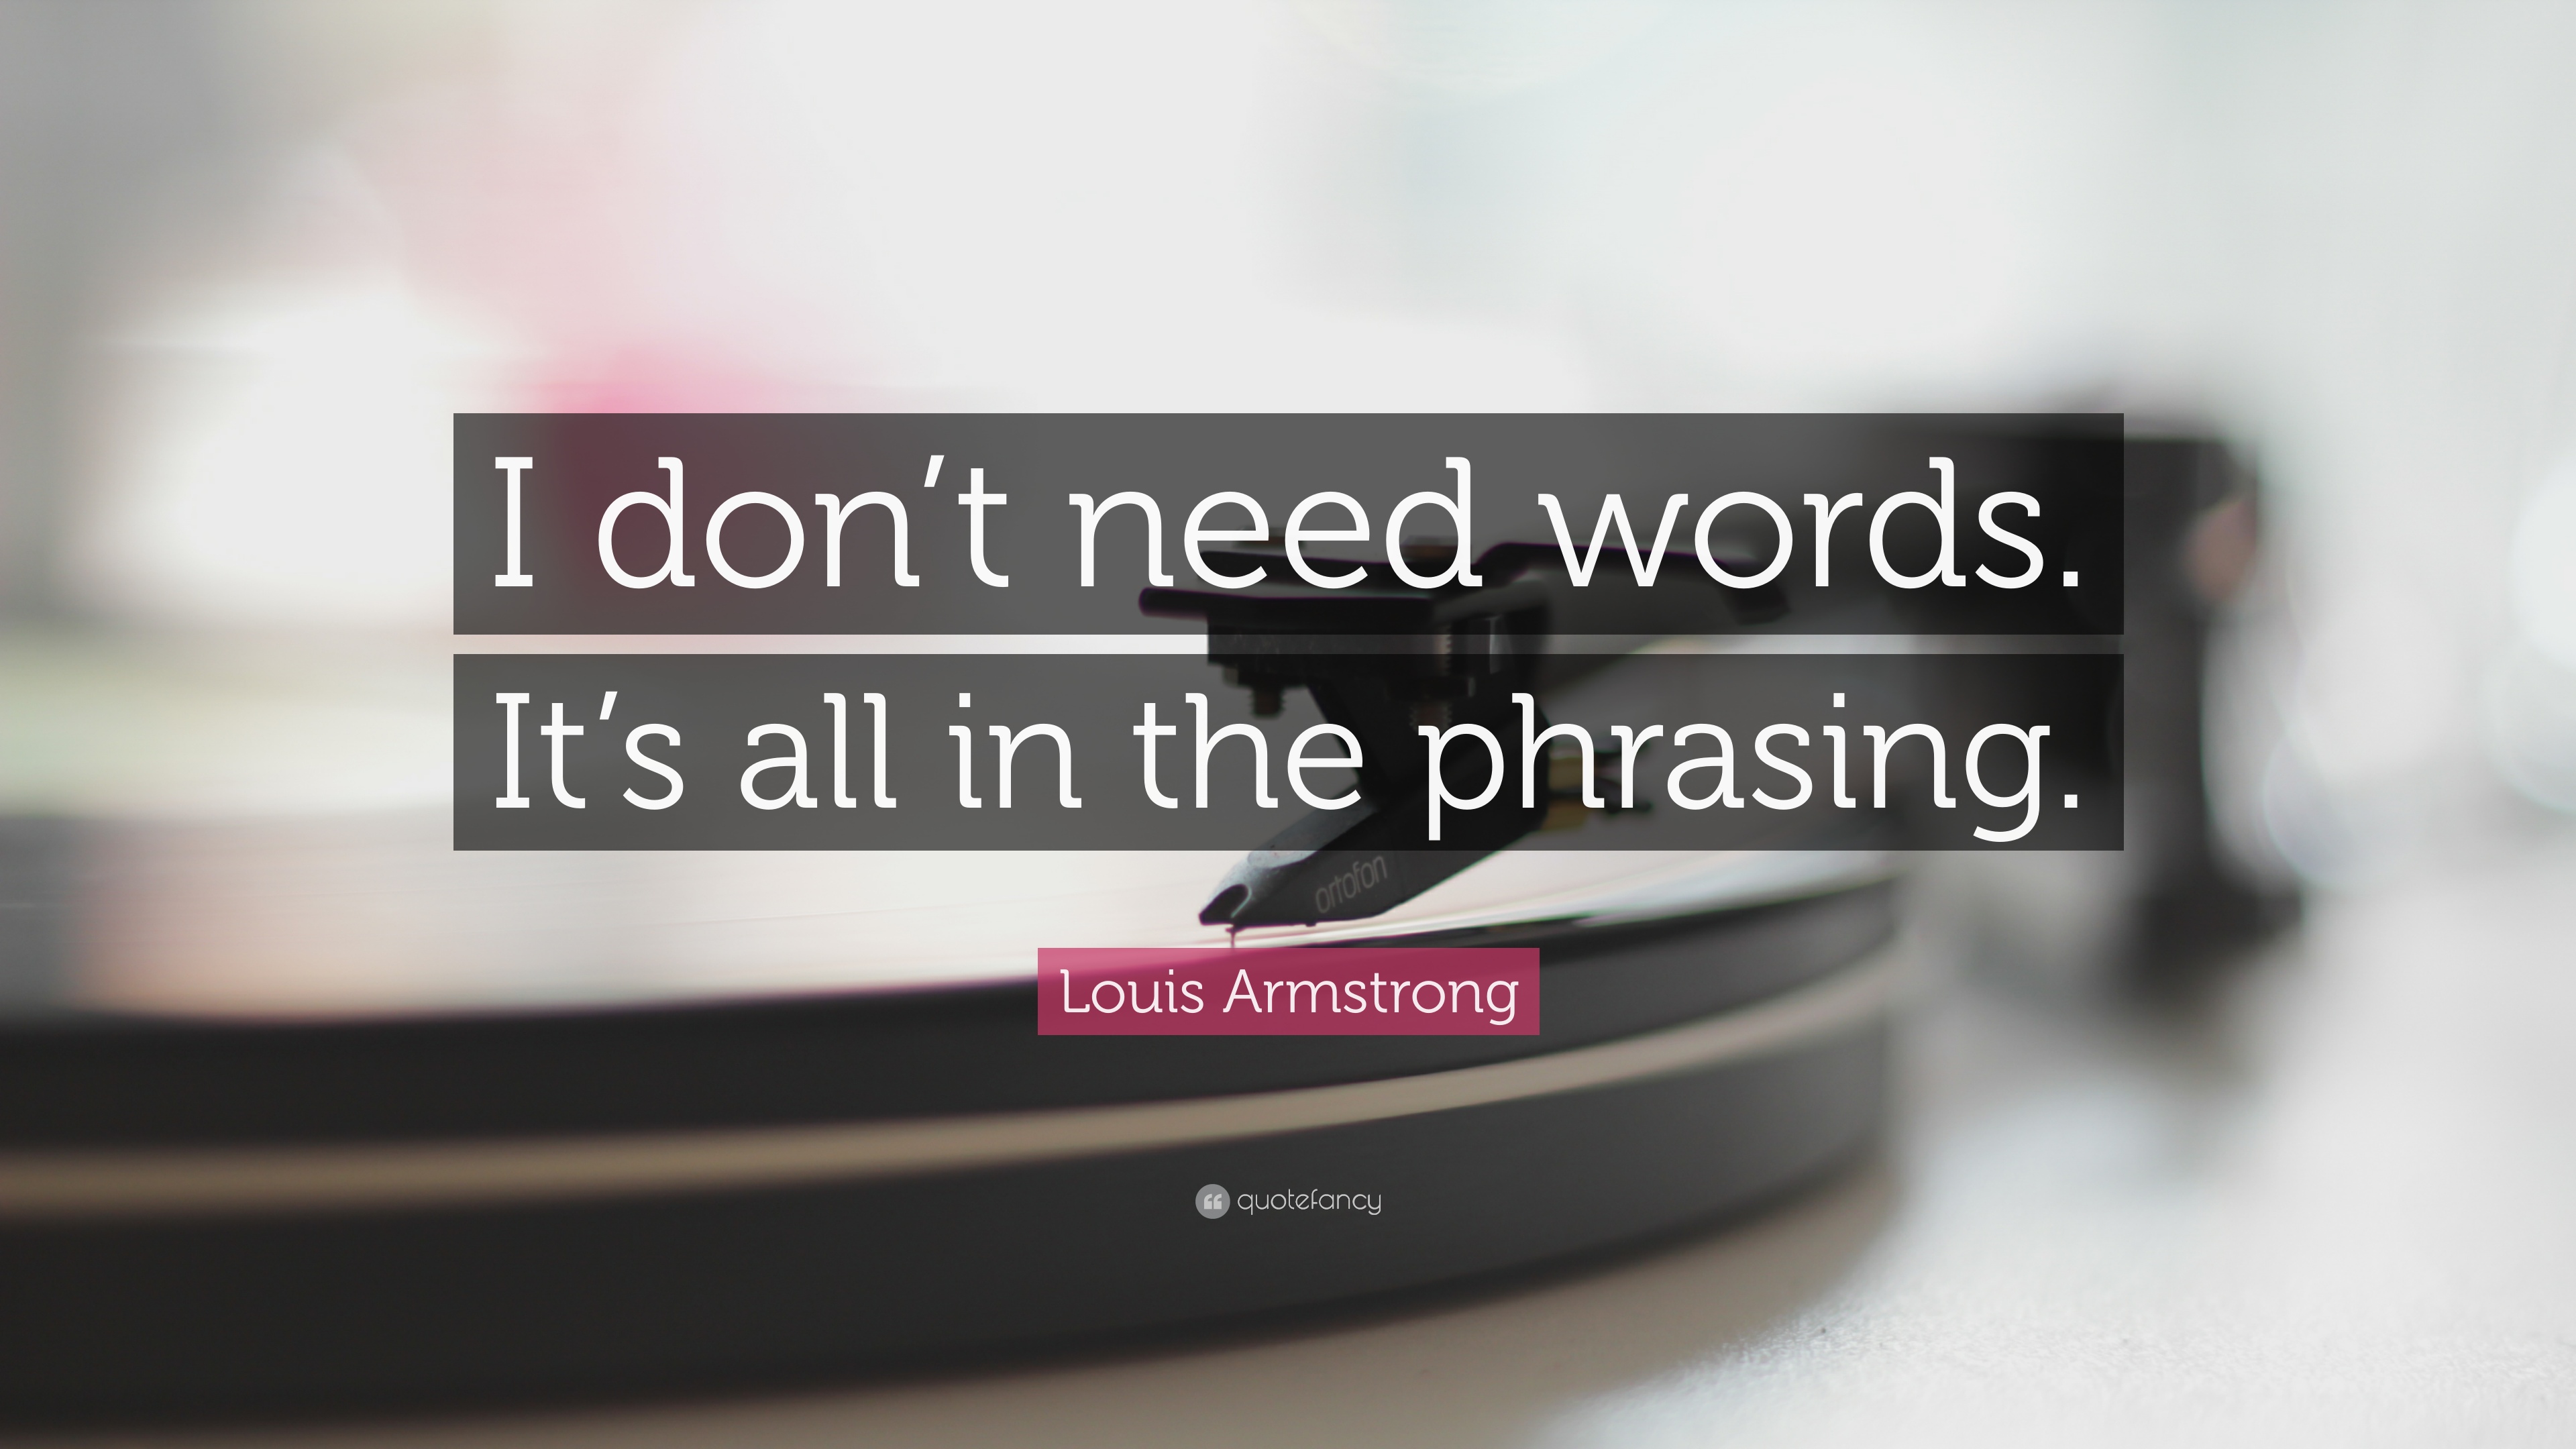 5 Quotes About Louis Armstrong